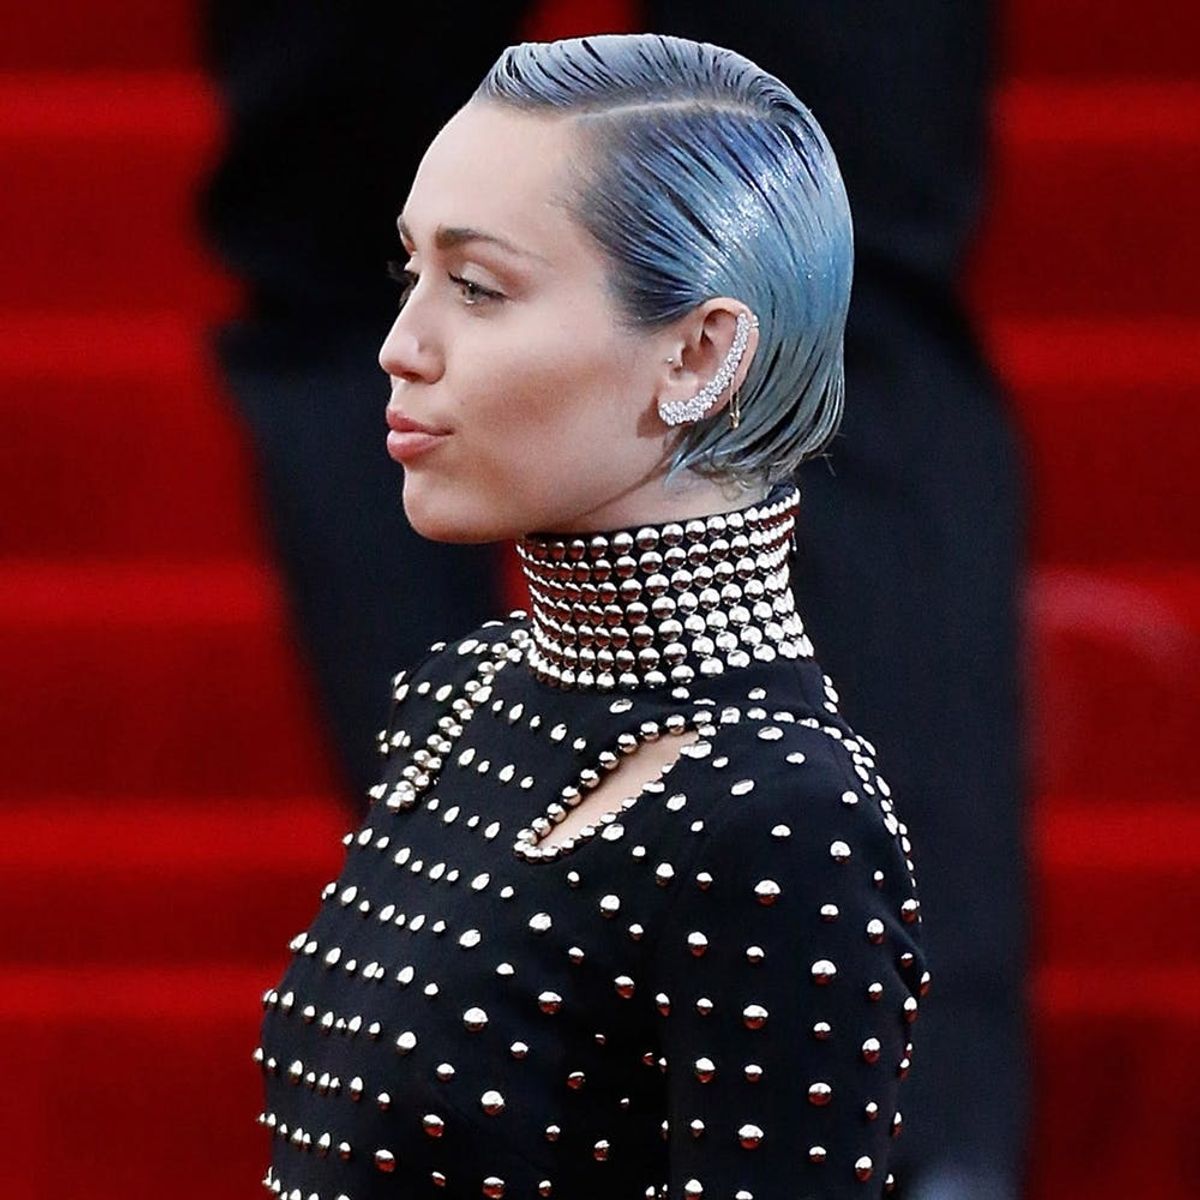 Miley Cyrus Debuted a More Shocking New ‘Do Than Katie Holmes at the Met Gala